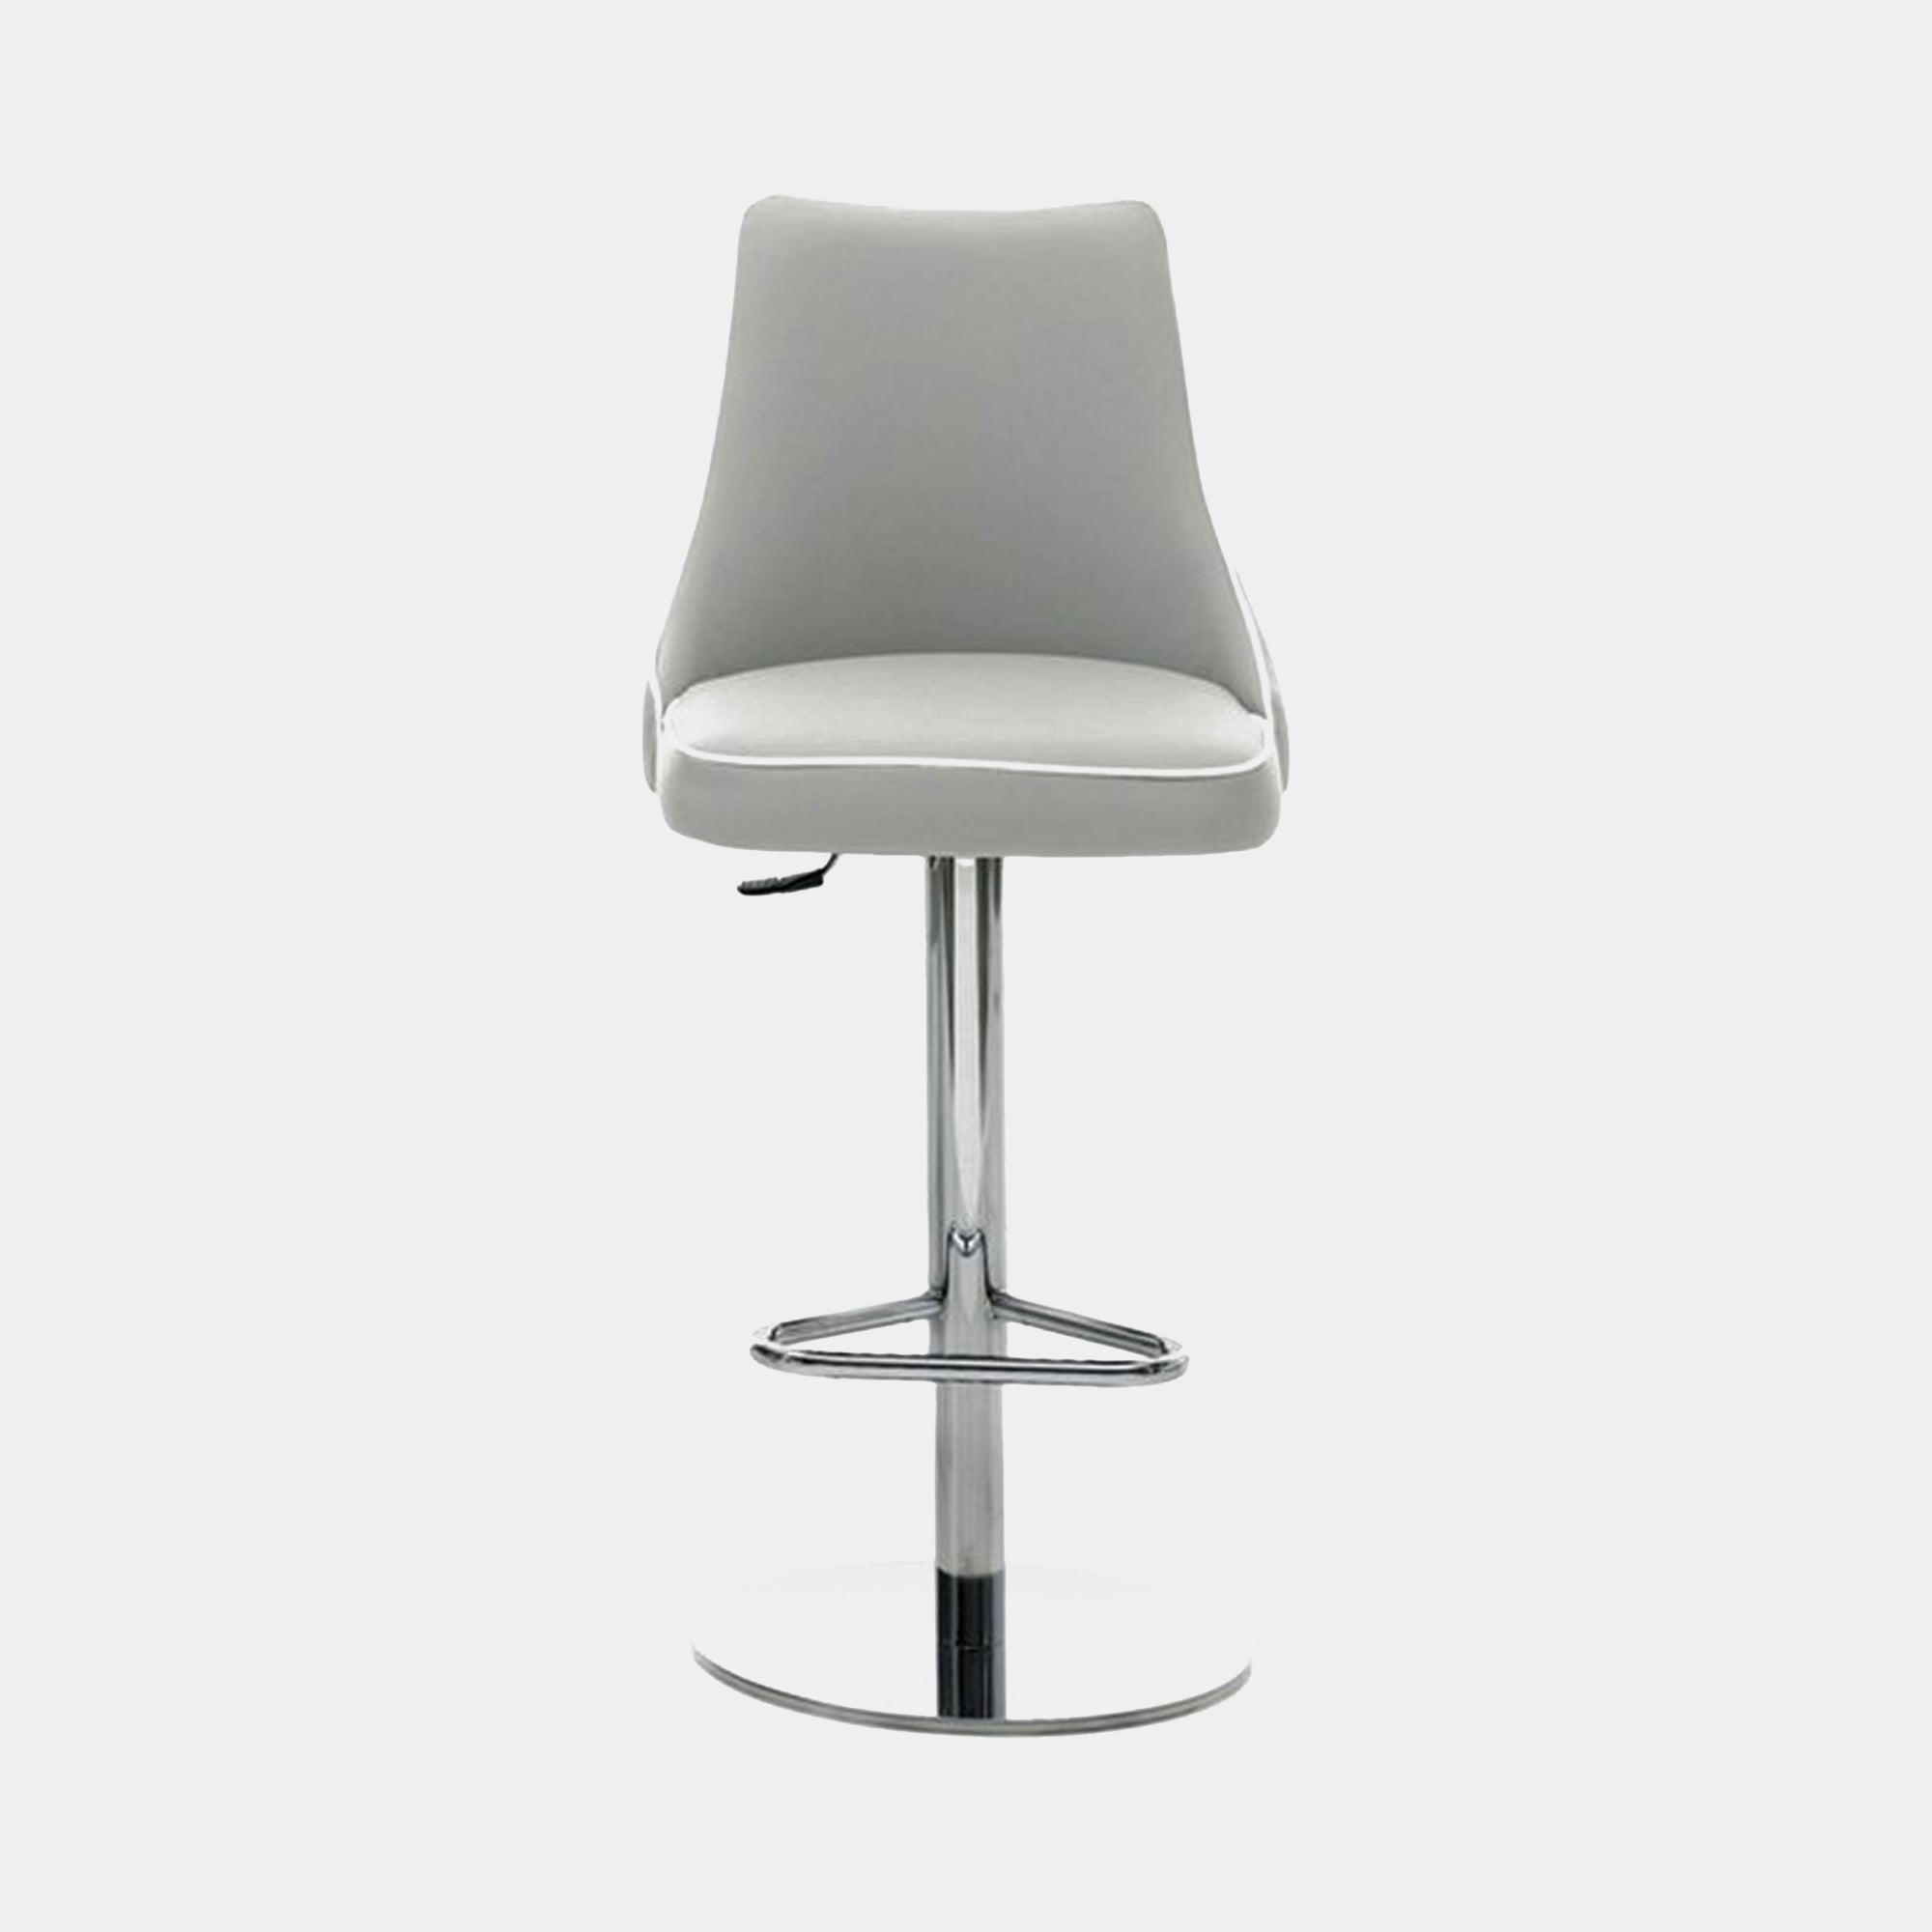 Swivel Bar Stool Metal Frame In Eco Leather Self Piped